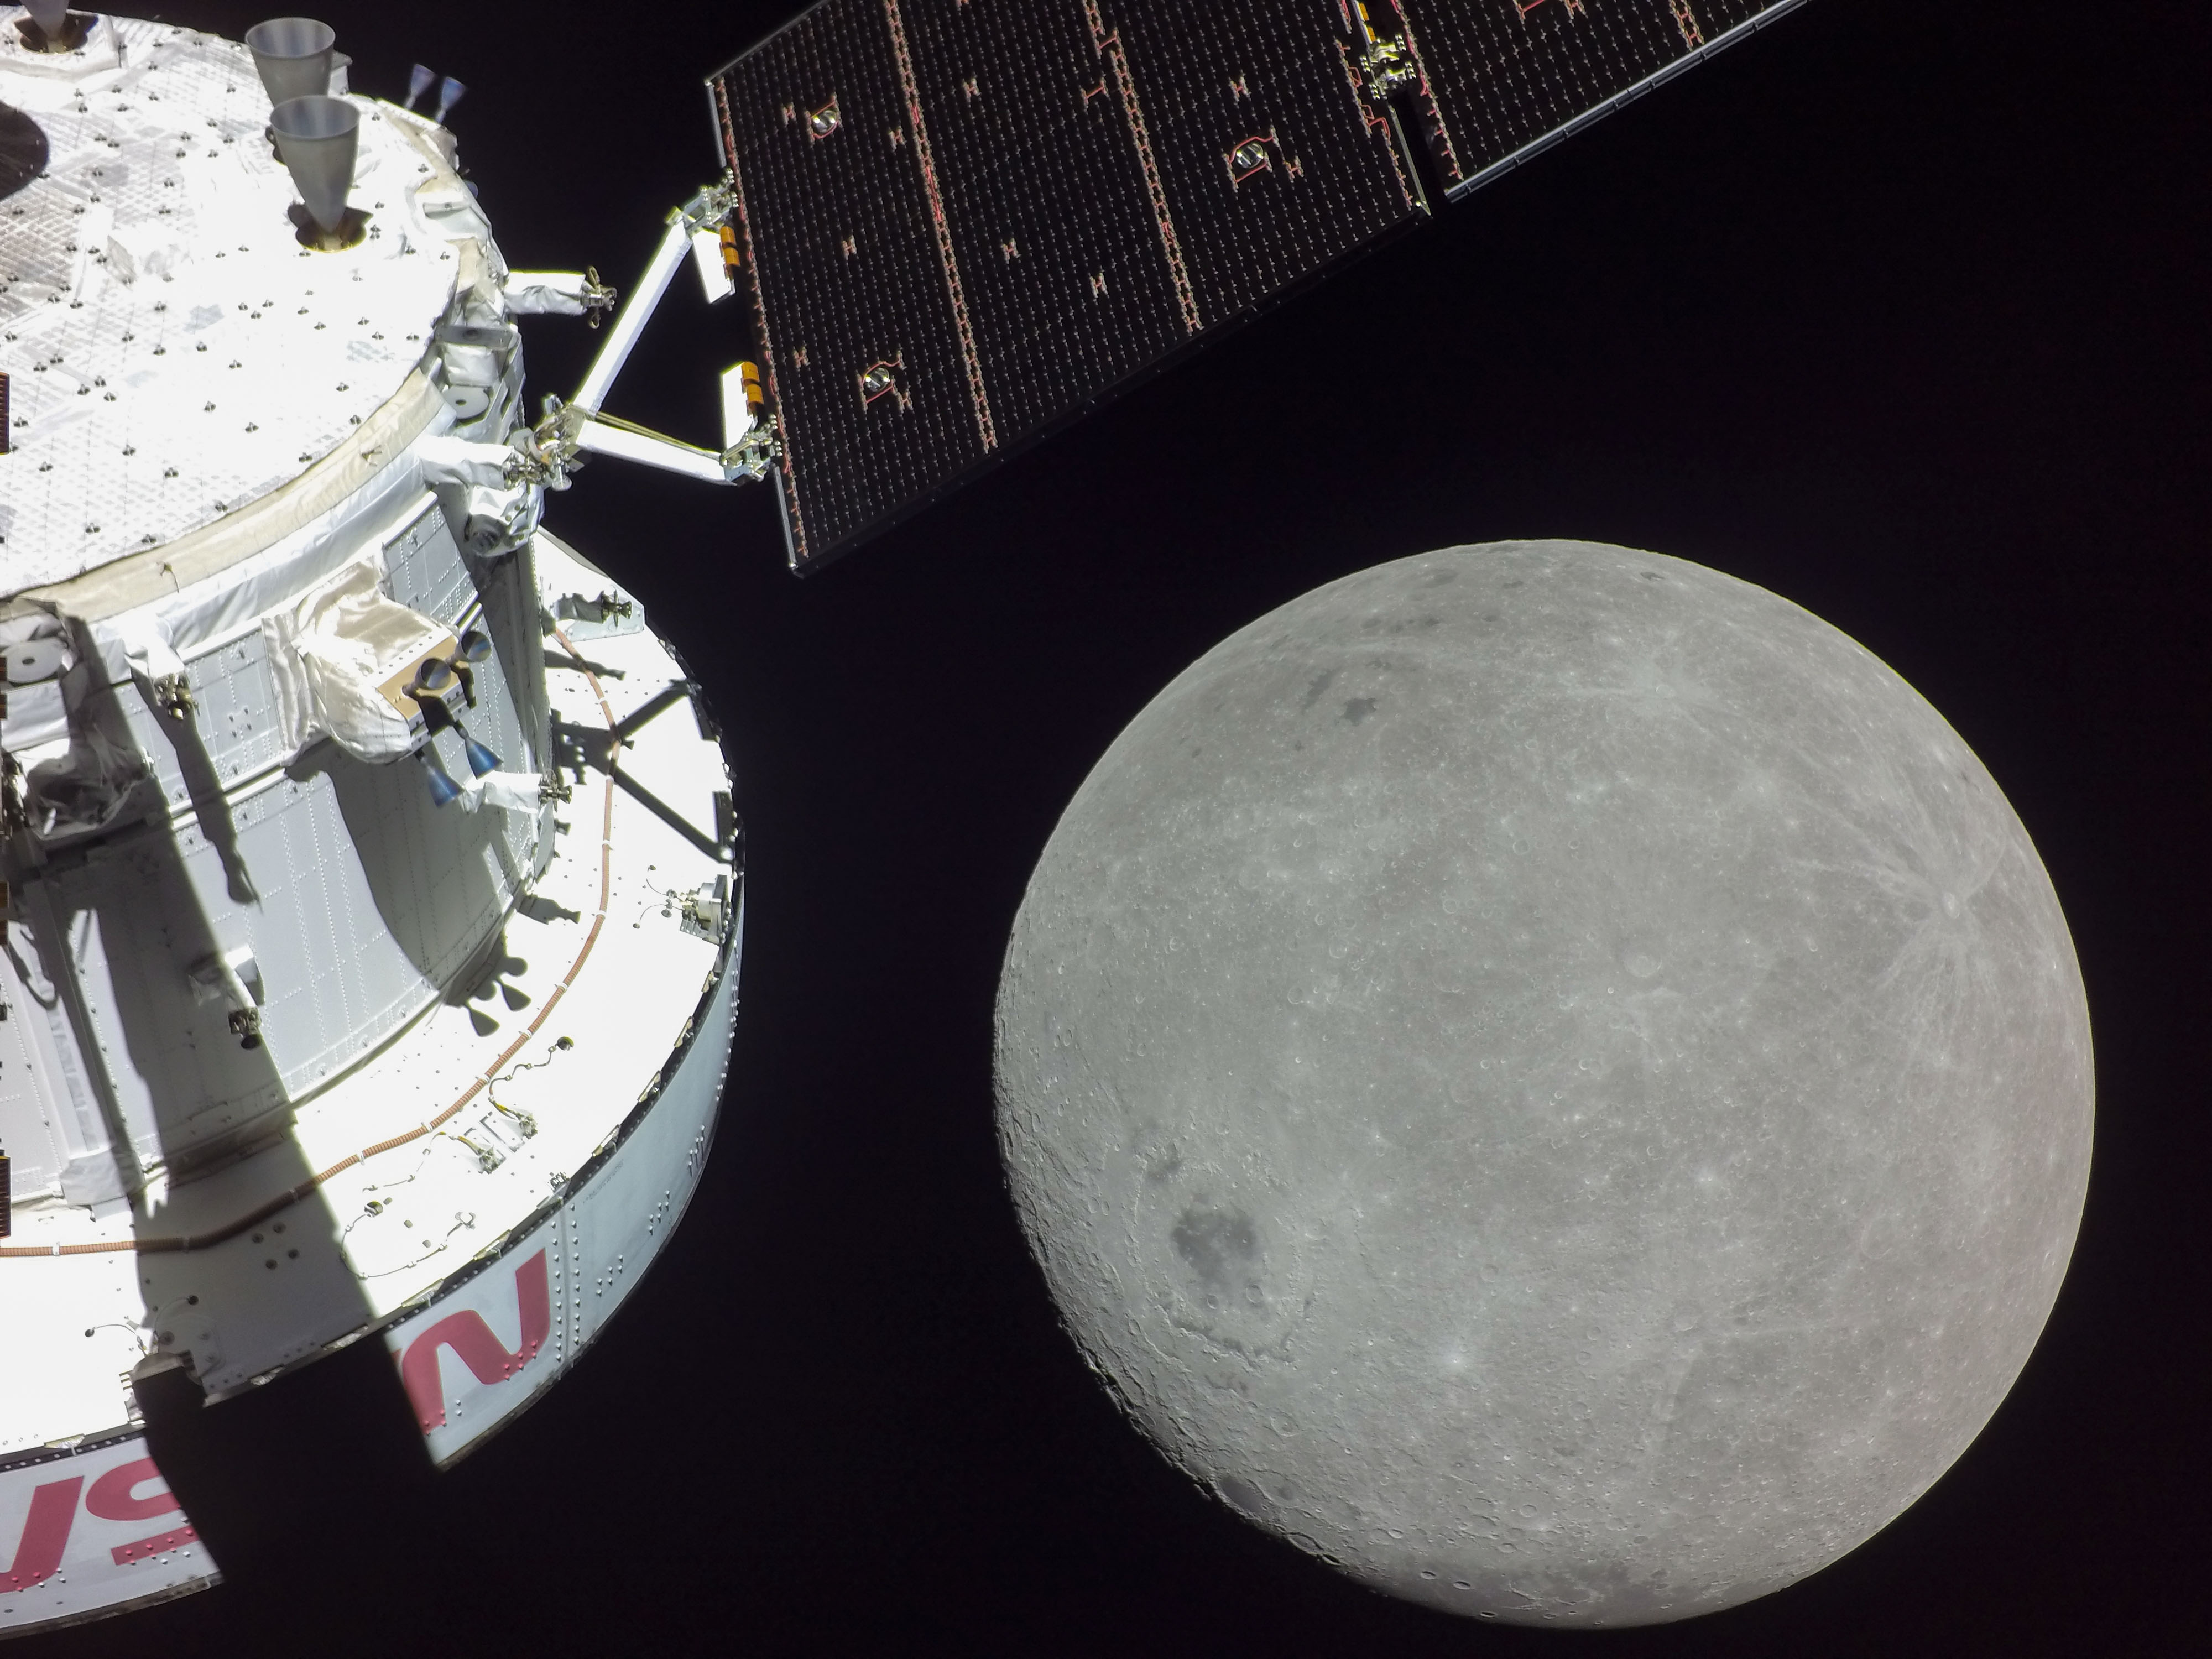 NASA's Orion took this awesome image of the Moon during closest approach